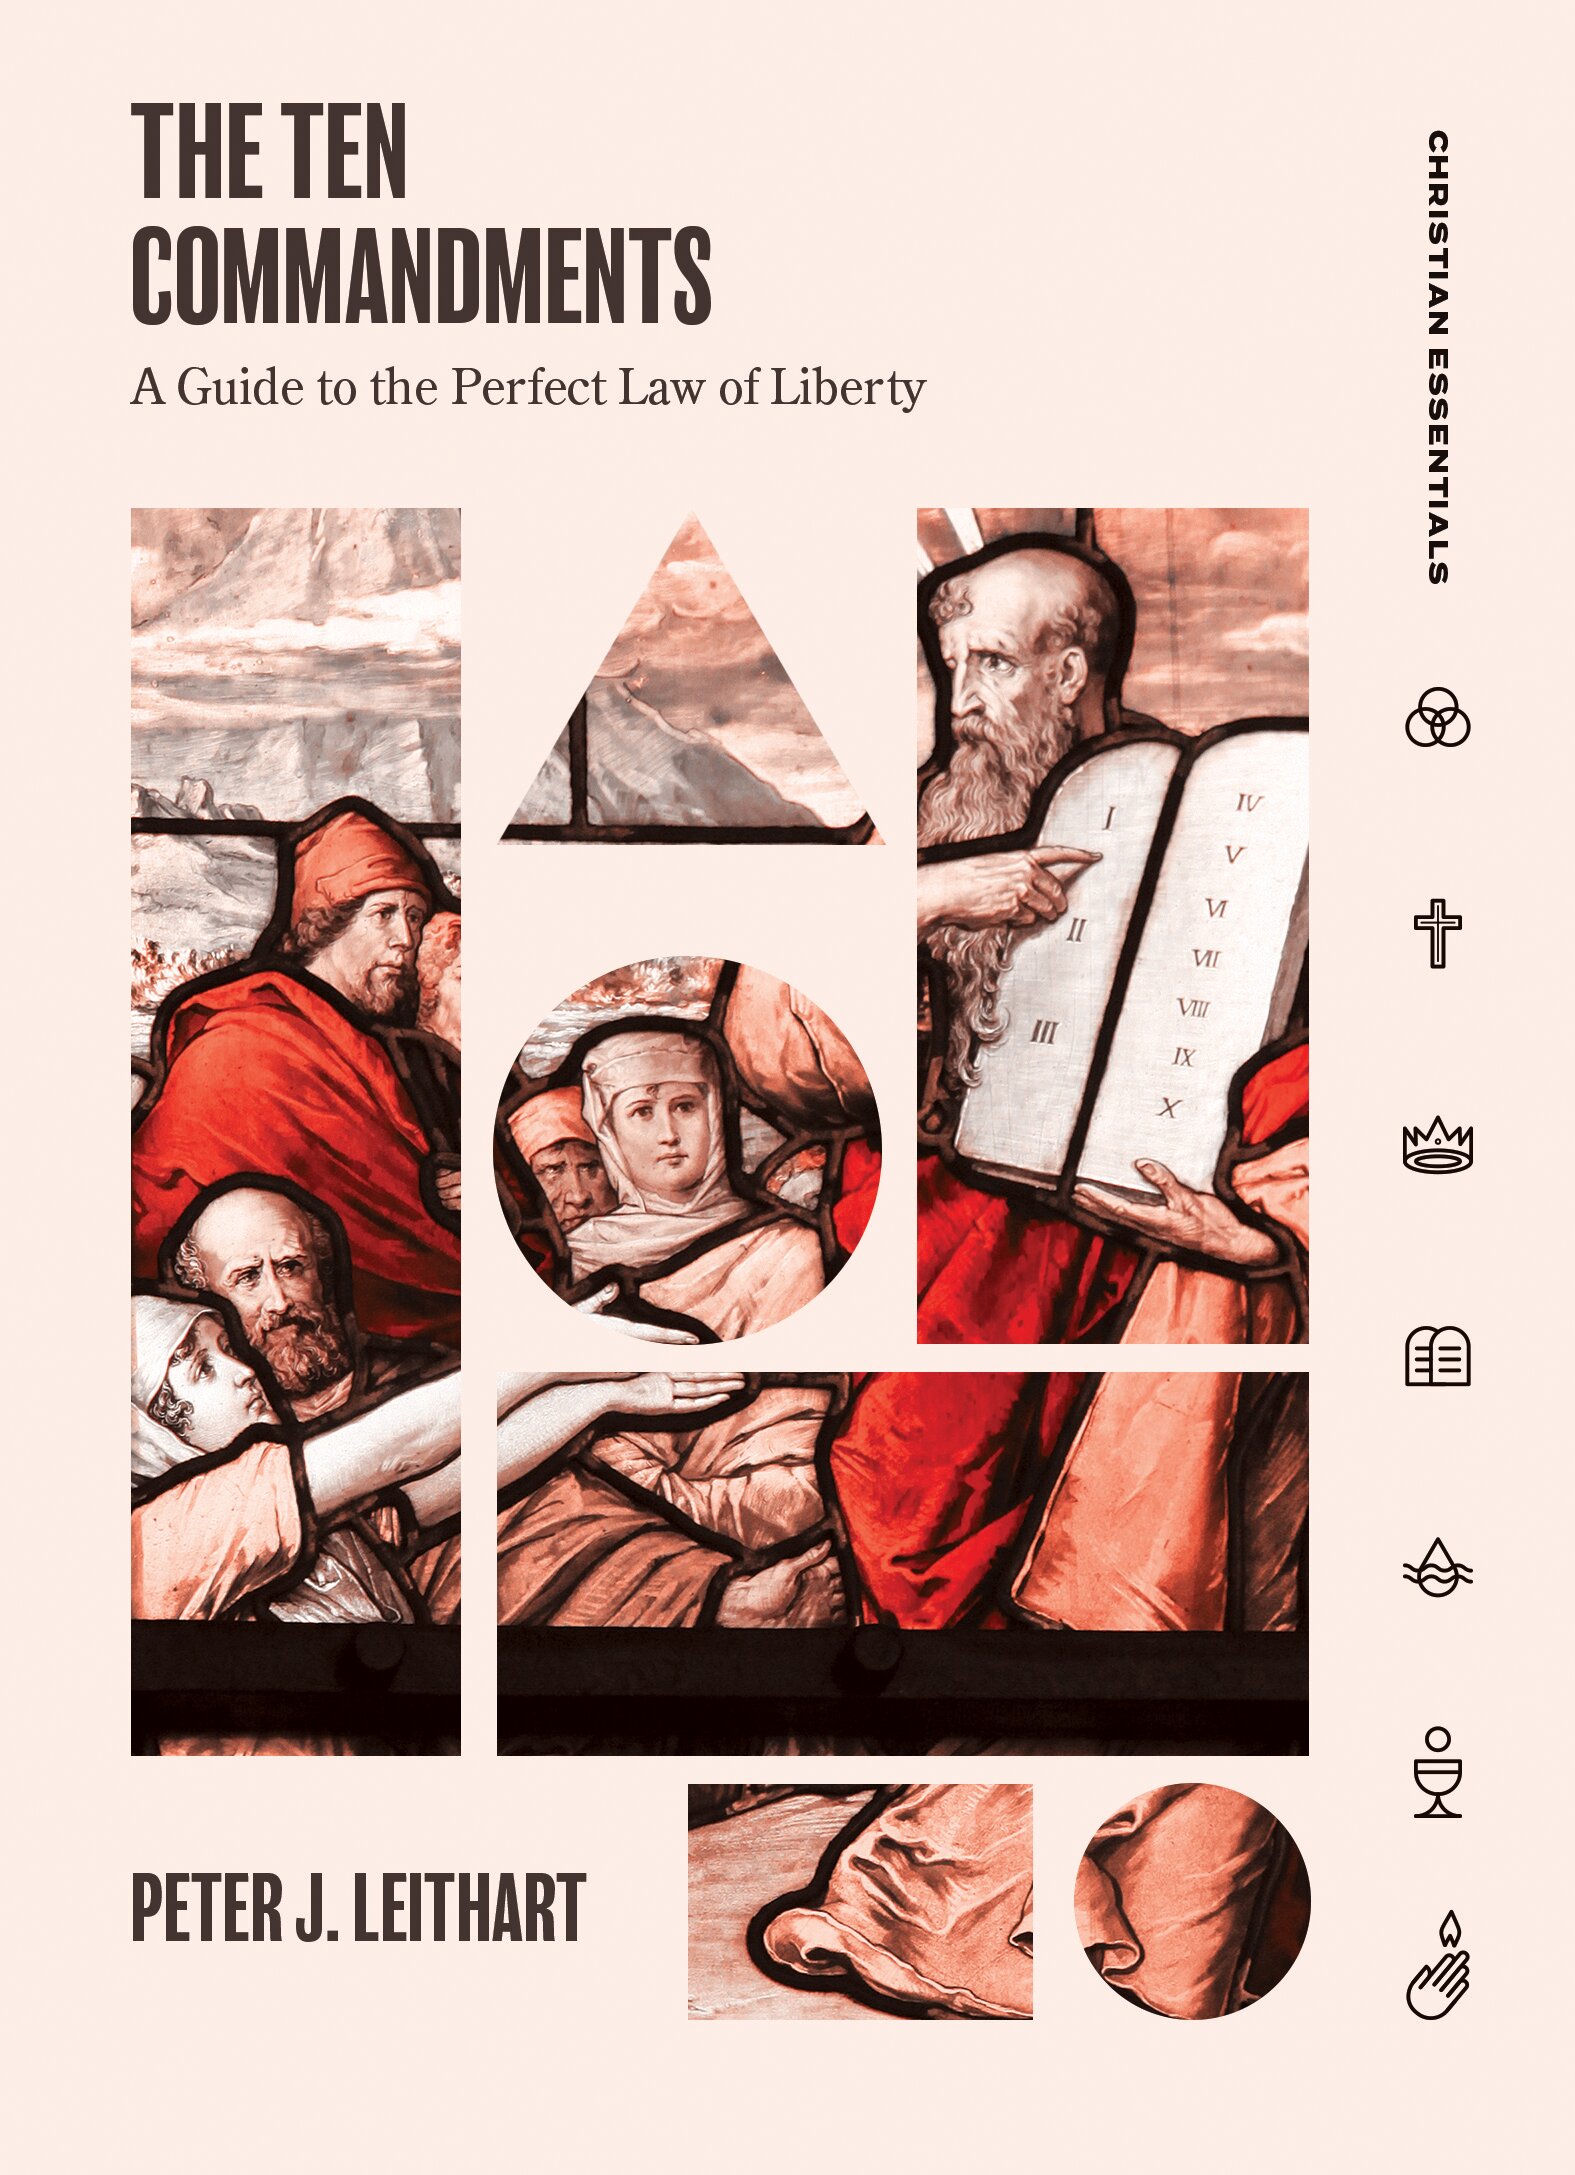 The Ten Commandments: A Guide to the Perfect Law of Liberty